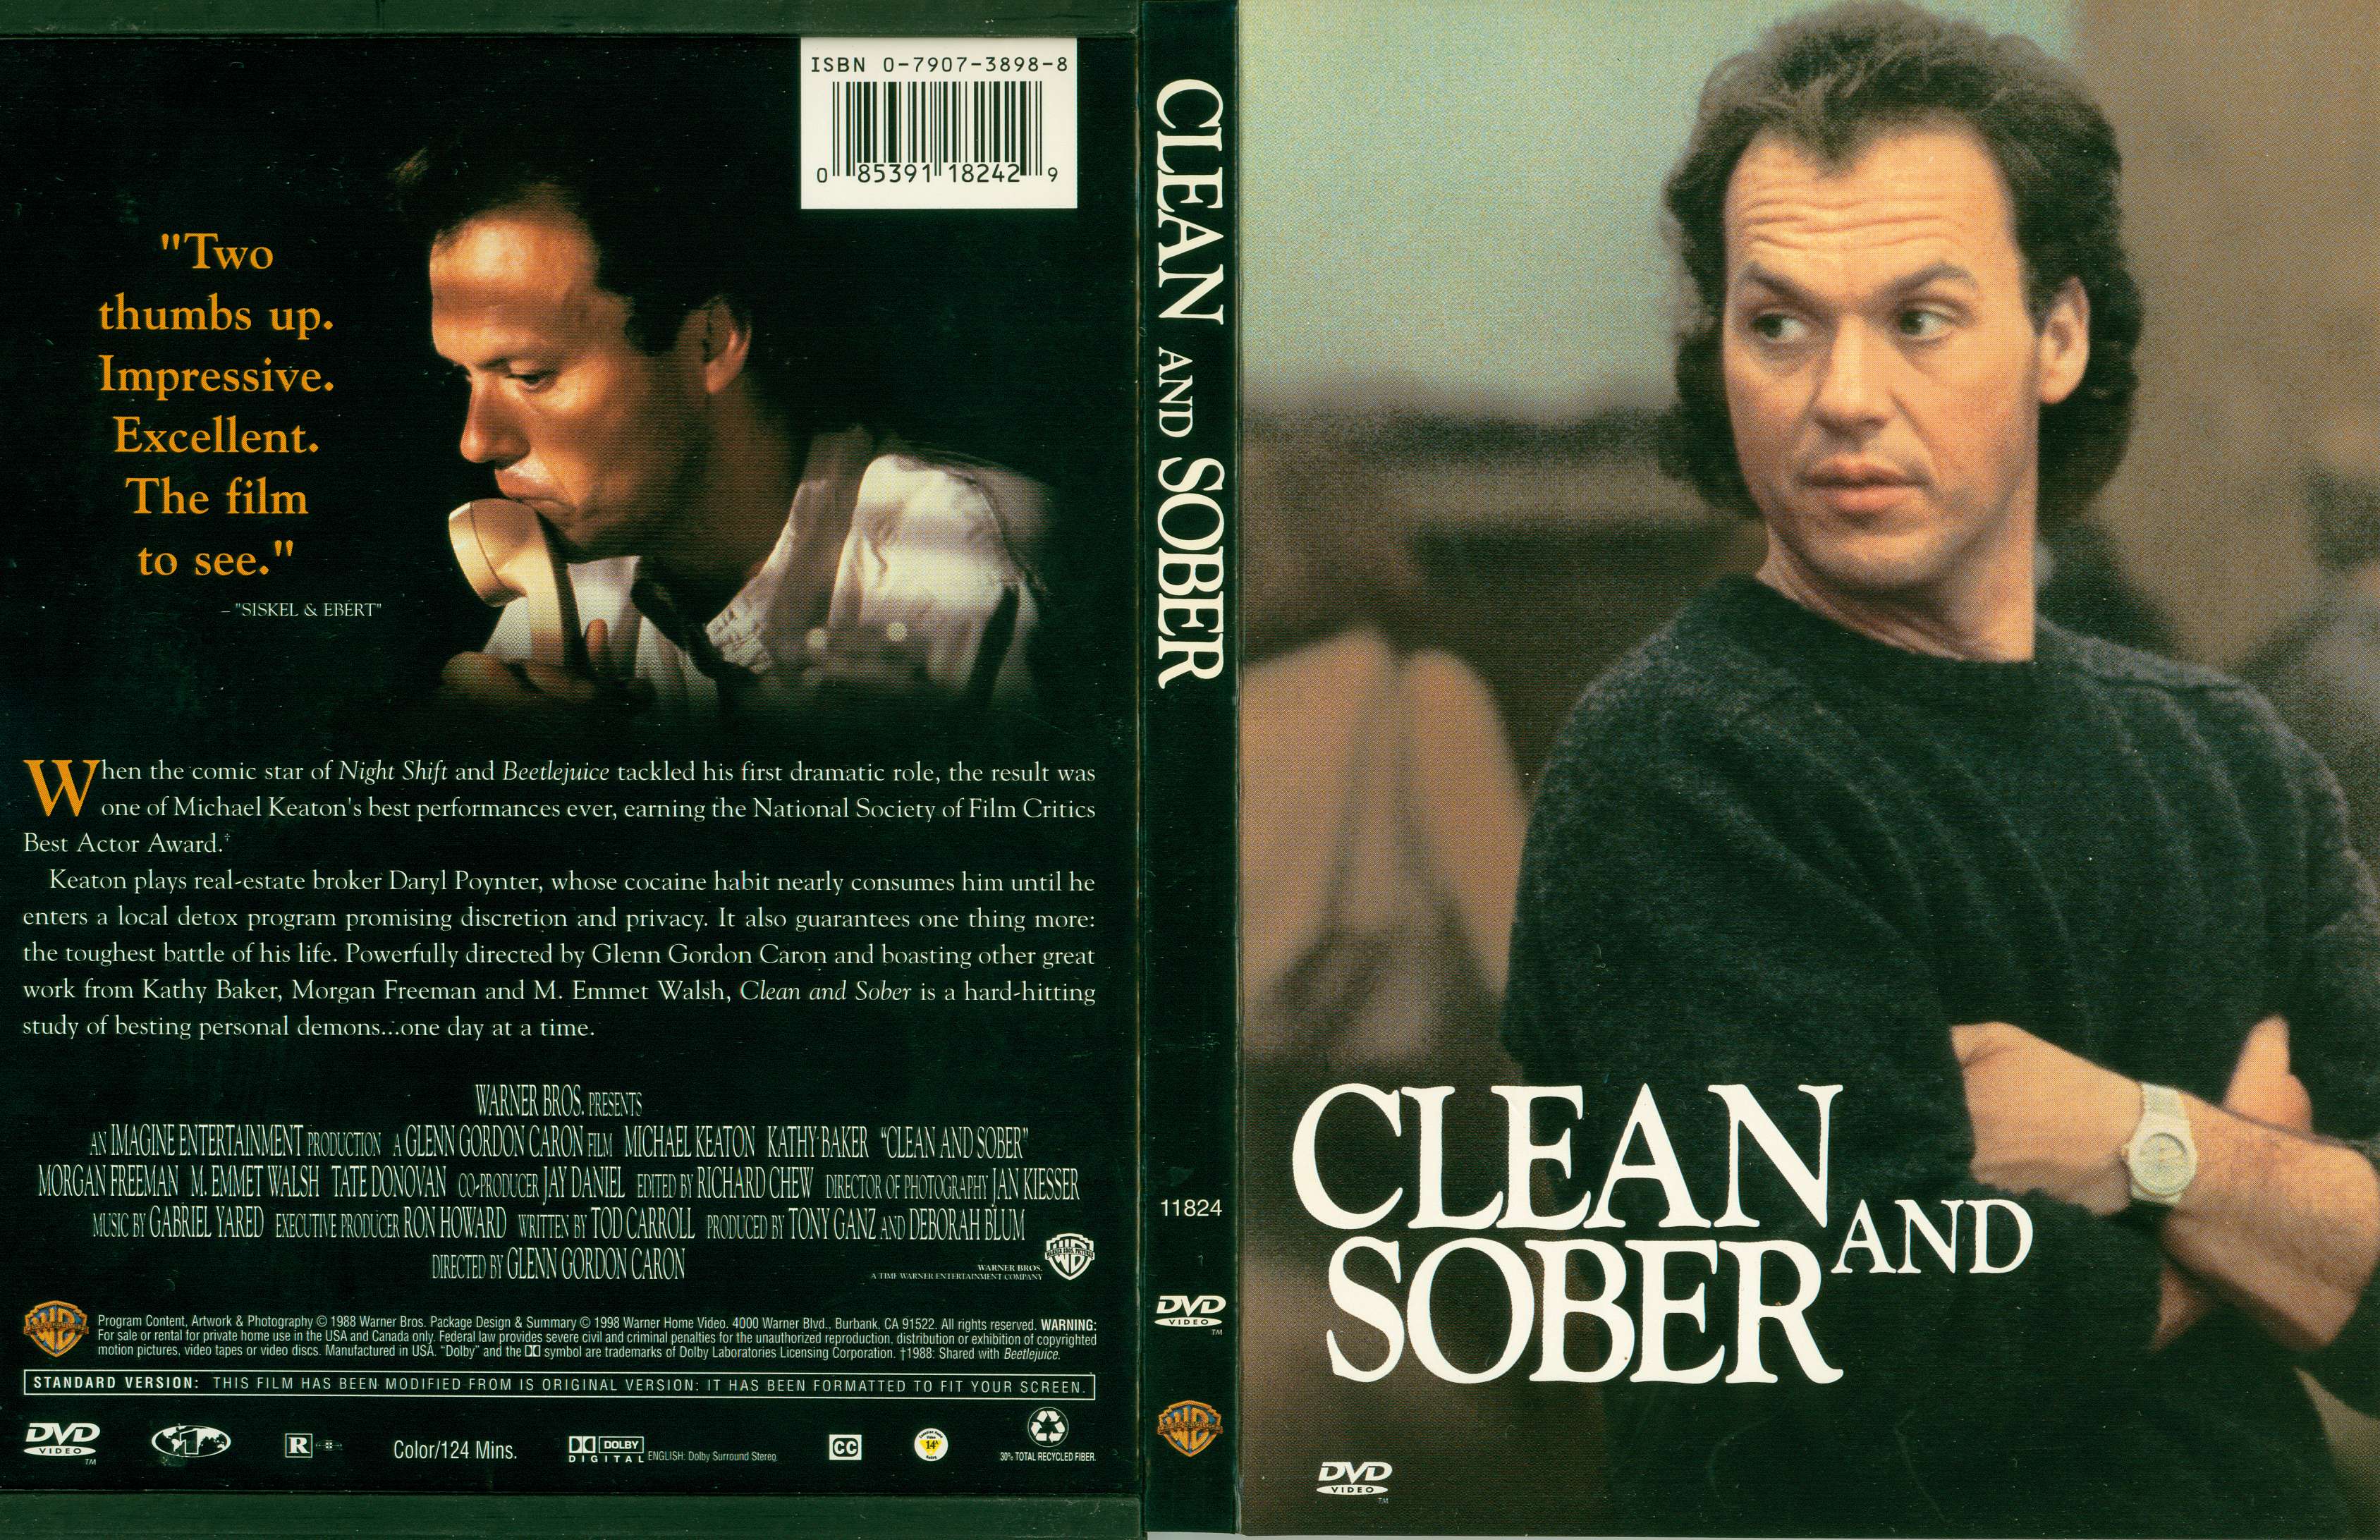 Jaquette DVD Clean and sober Zone 1